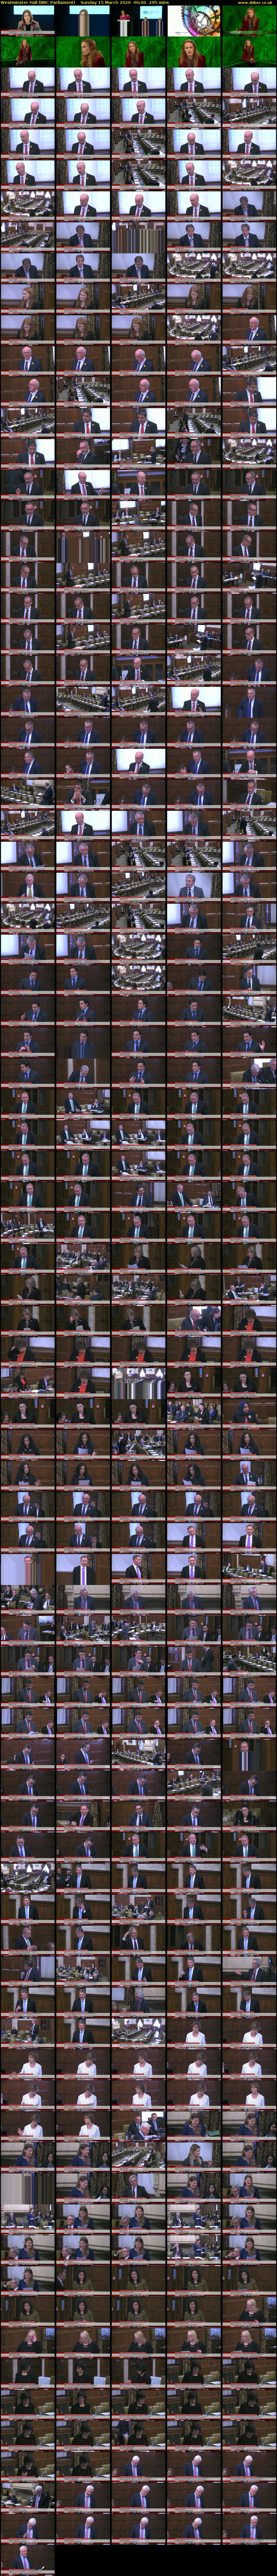 Westminster Hall (BBC Parliament) Sunday 15 March 2020 06:00 - 10:55